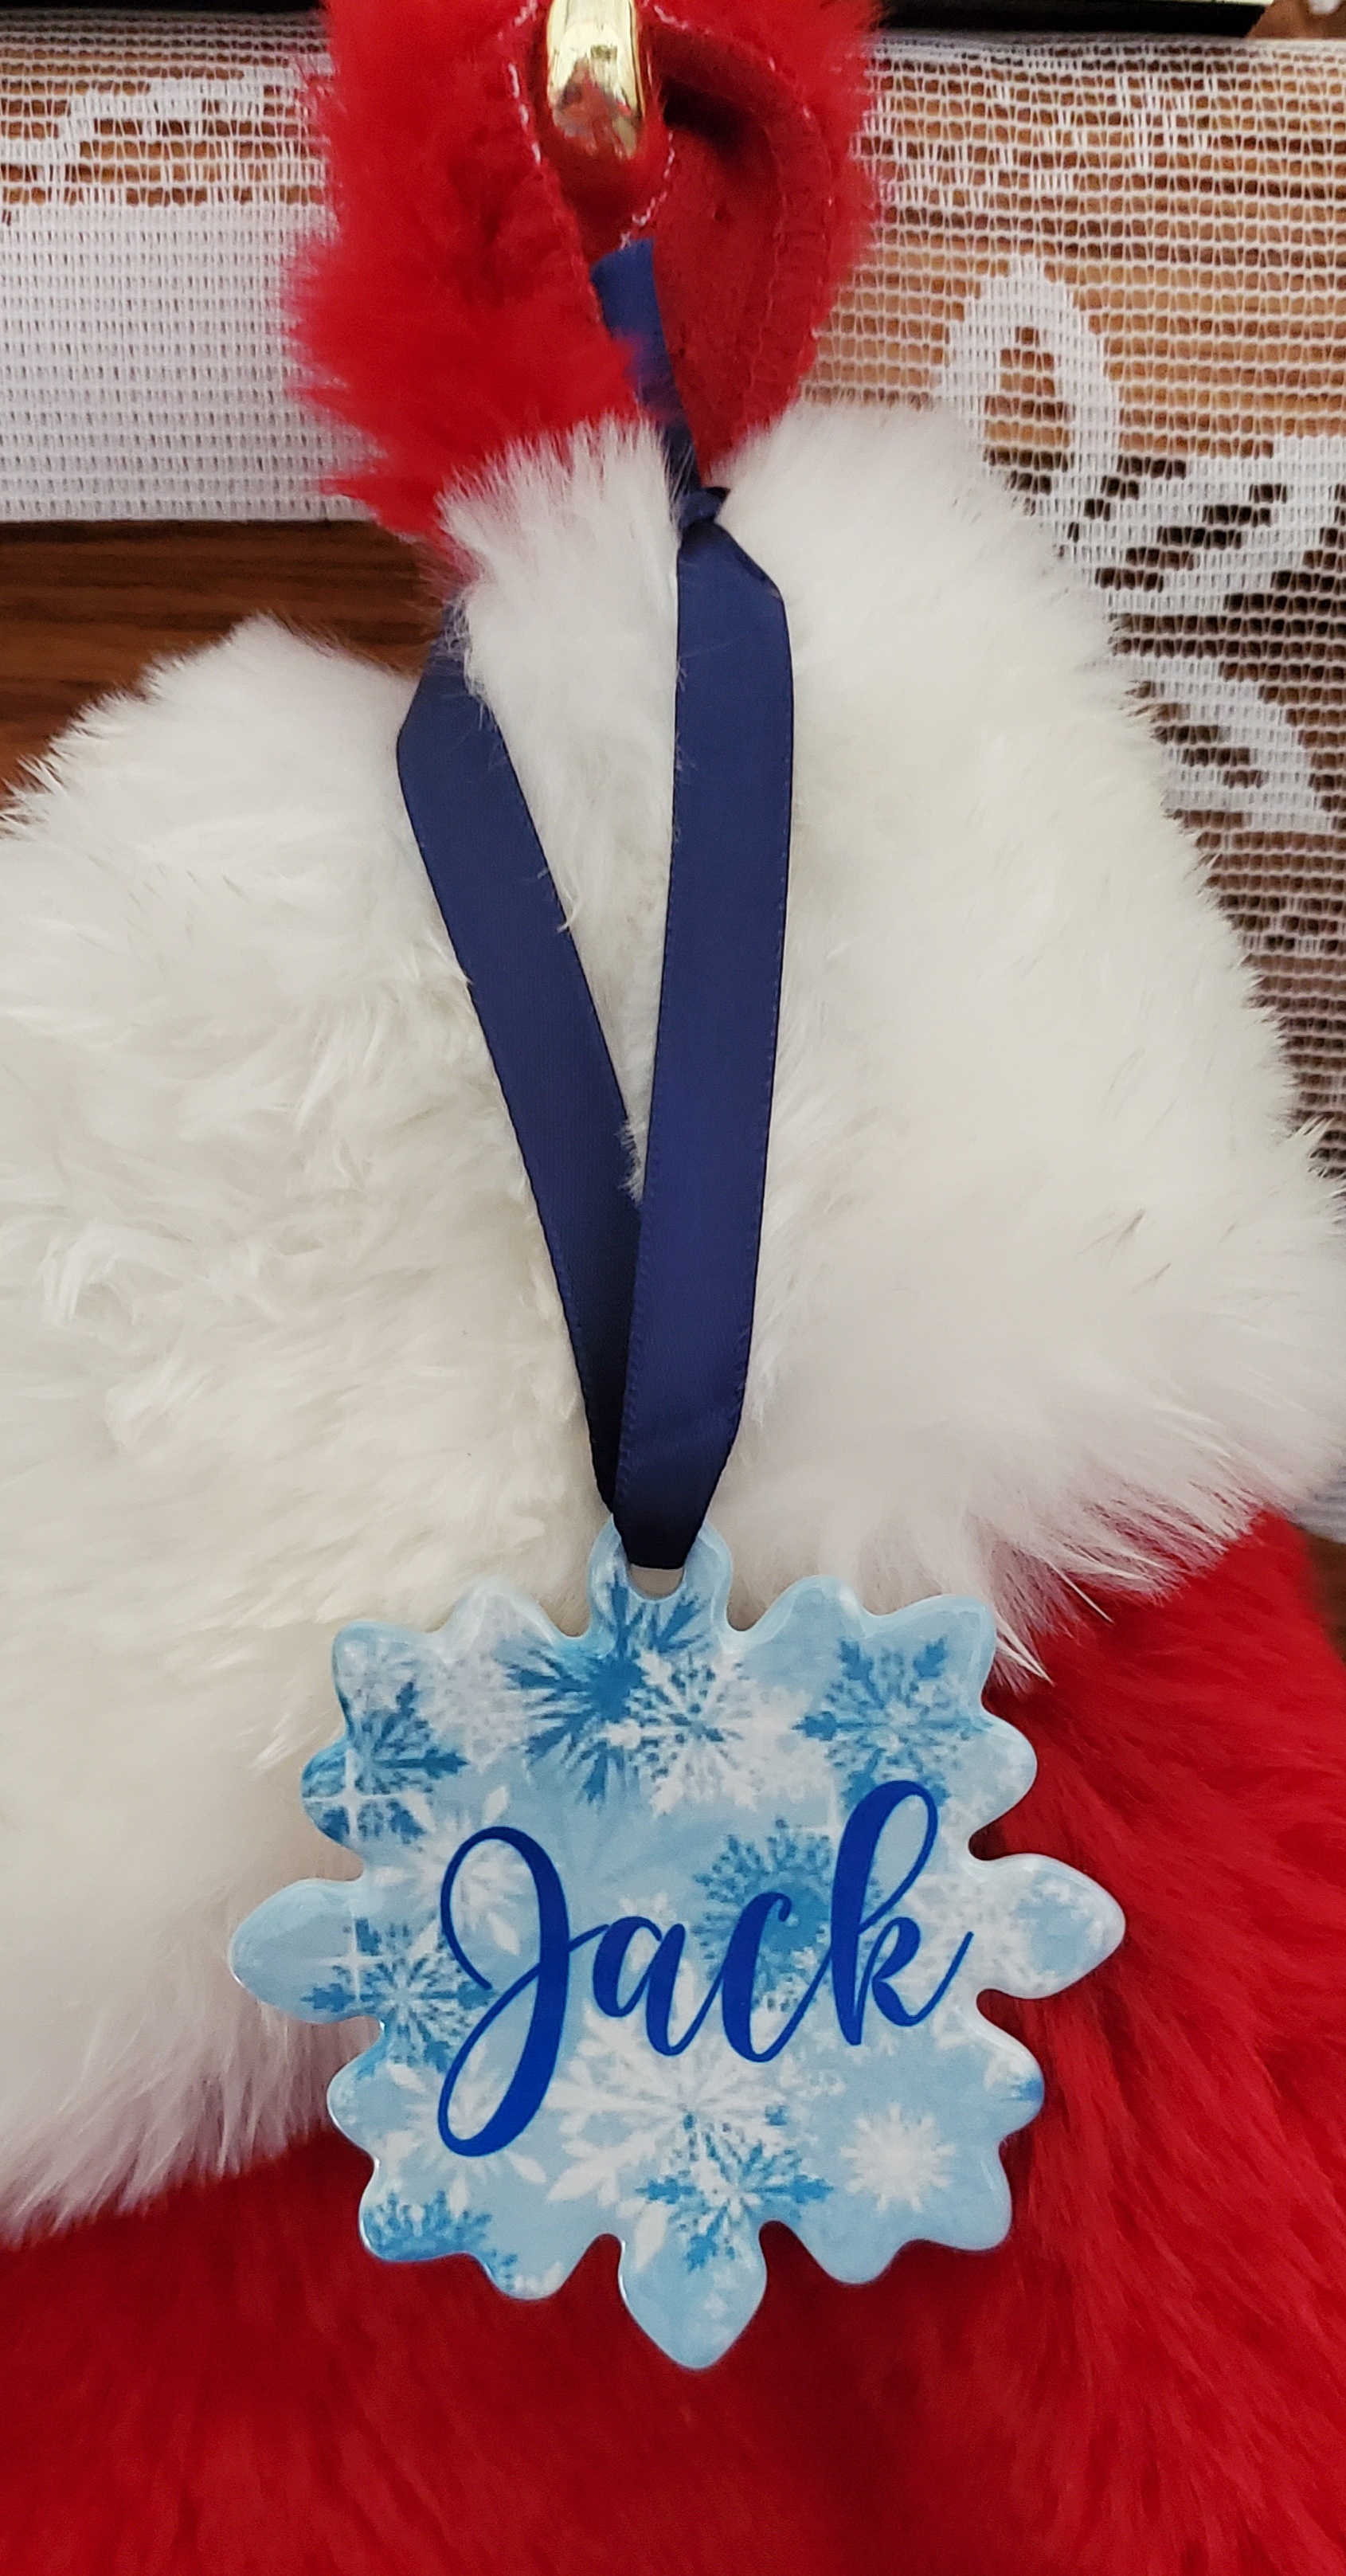 Stocking tag made with sublimation printing